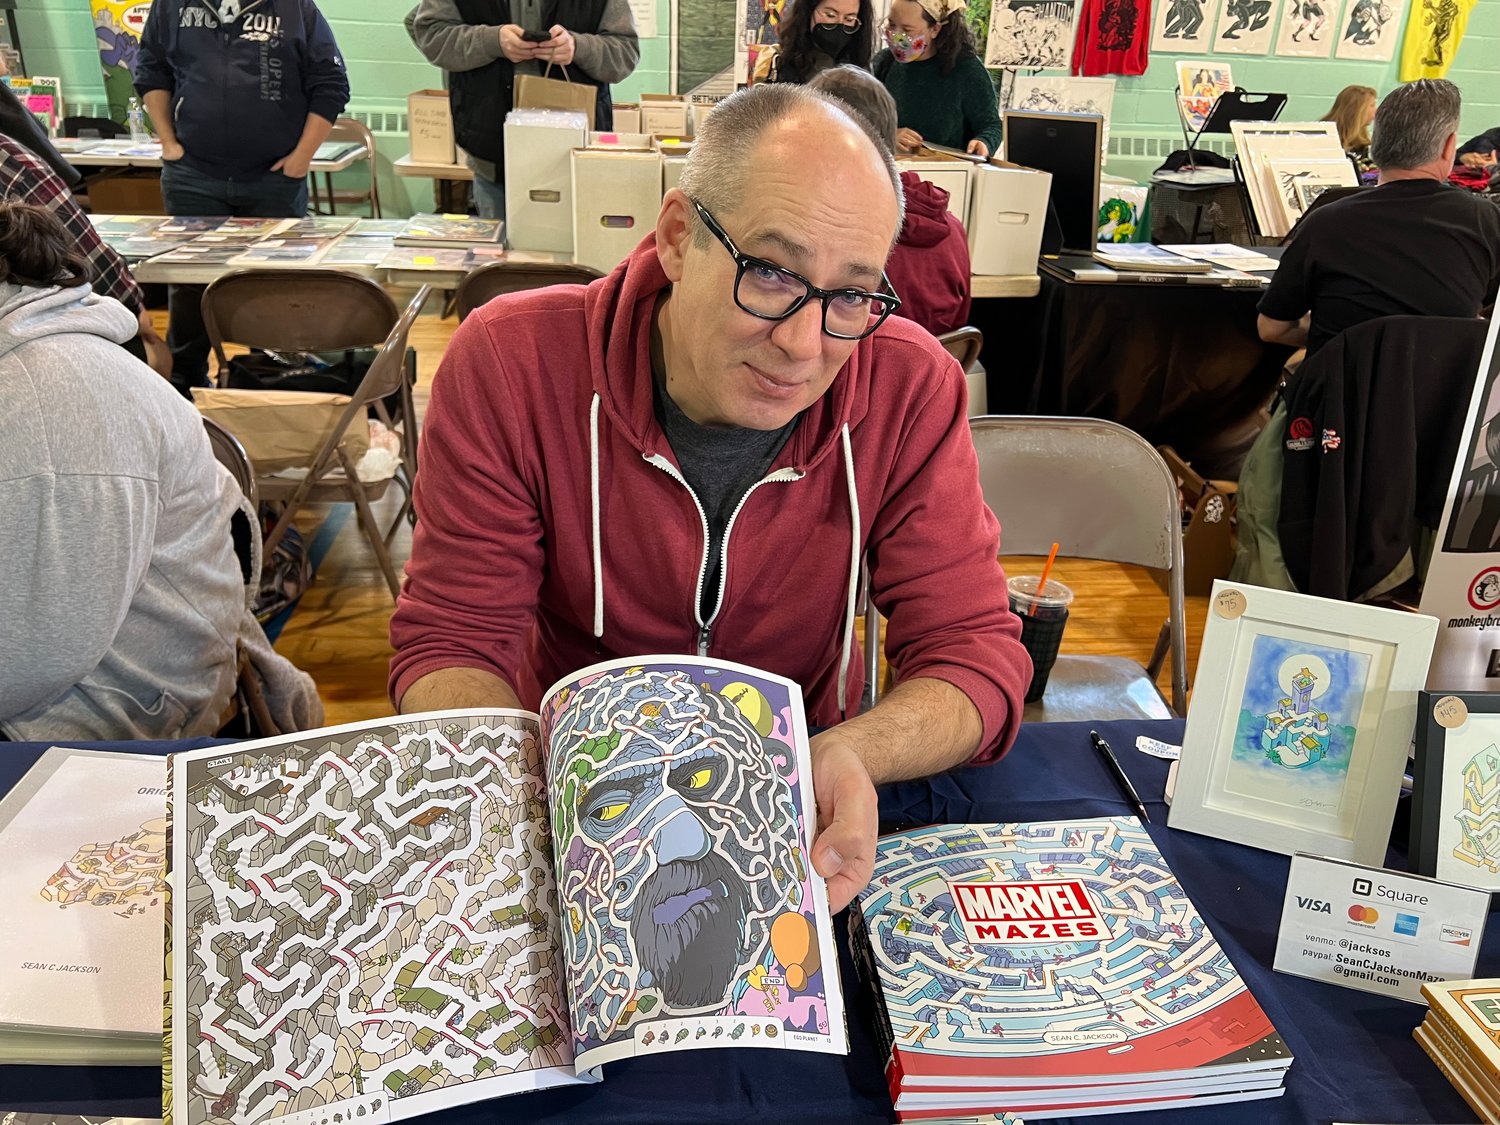 Sean Jackson displayed his new book, which features illustrations of mazes in the Marvel Universe.